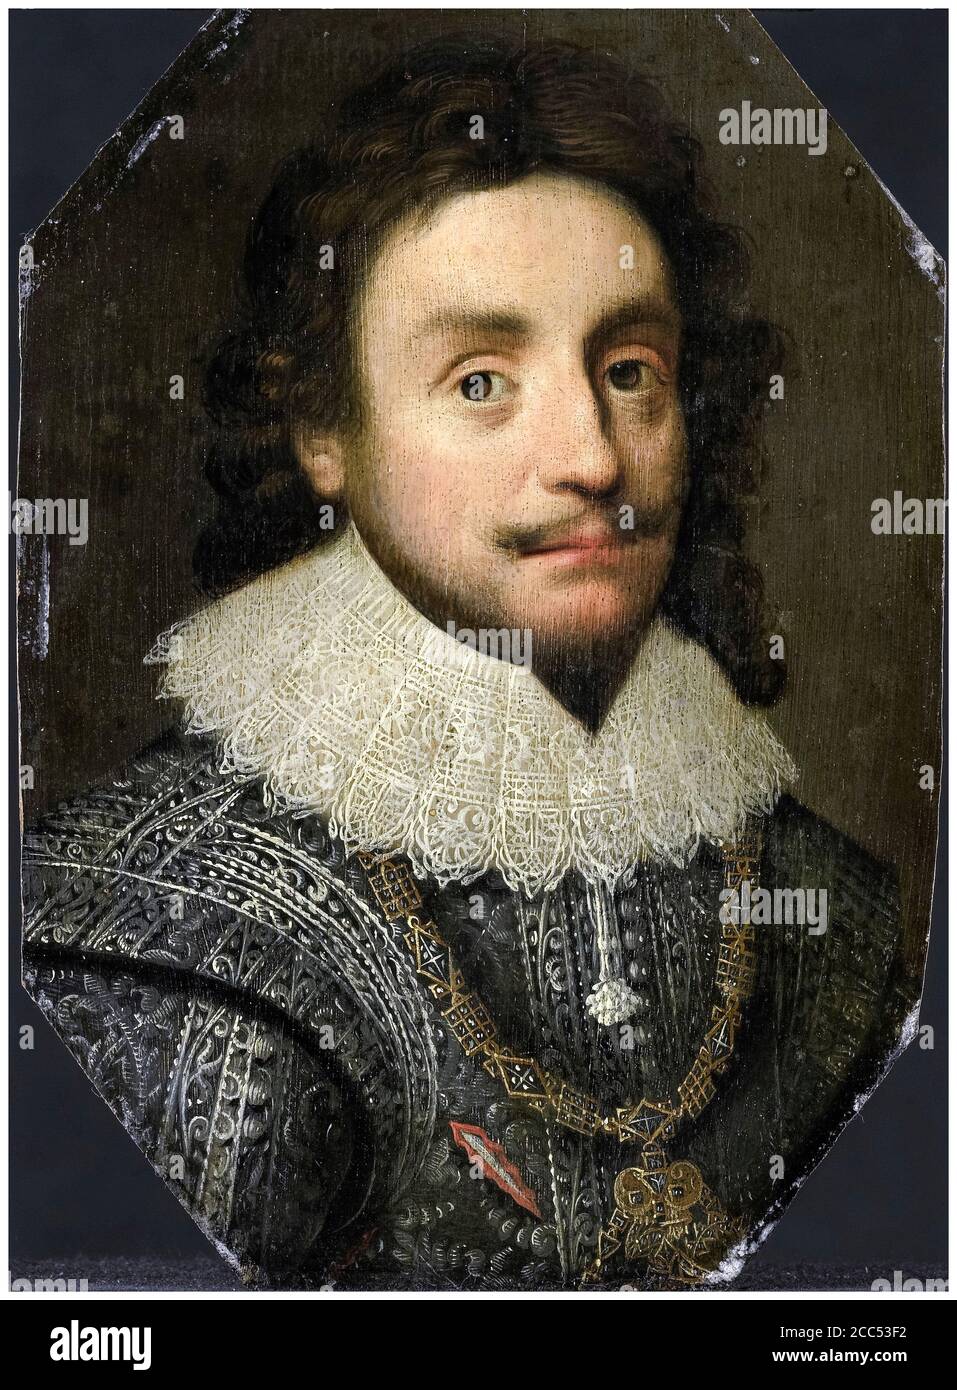 Frederick V (1596-1632), Elector Palatine, King of Bohemia, portrait painting after Michiel Janszoon van Mierevelt, after 1621 Stock Photo